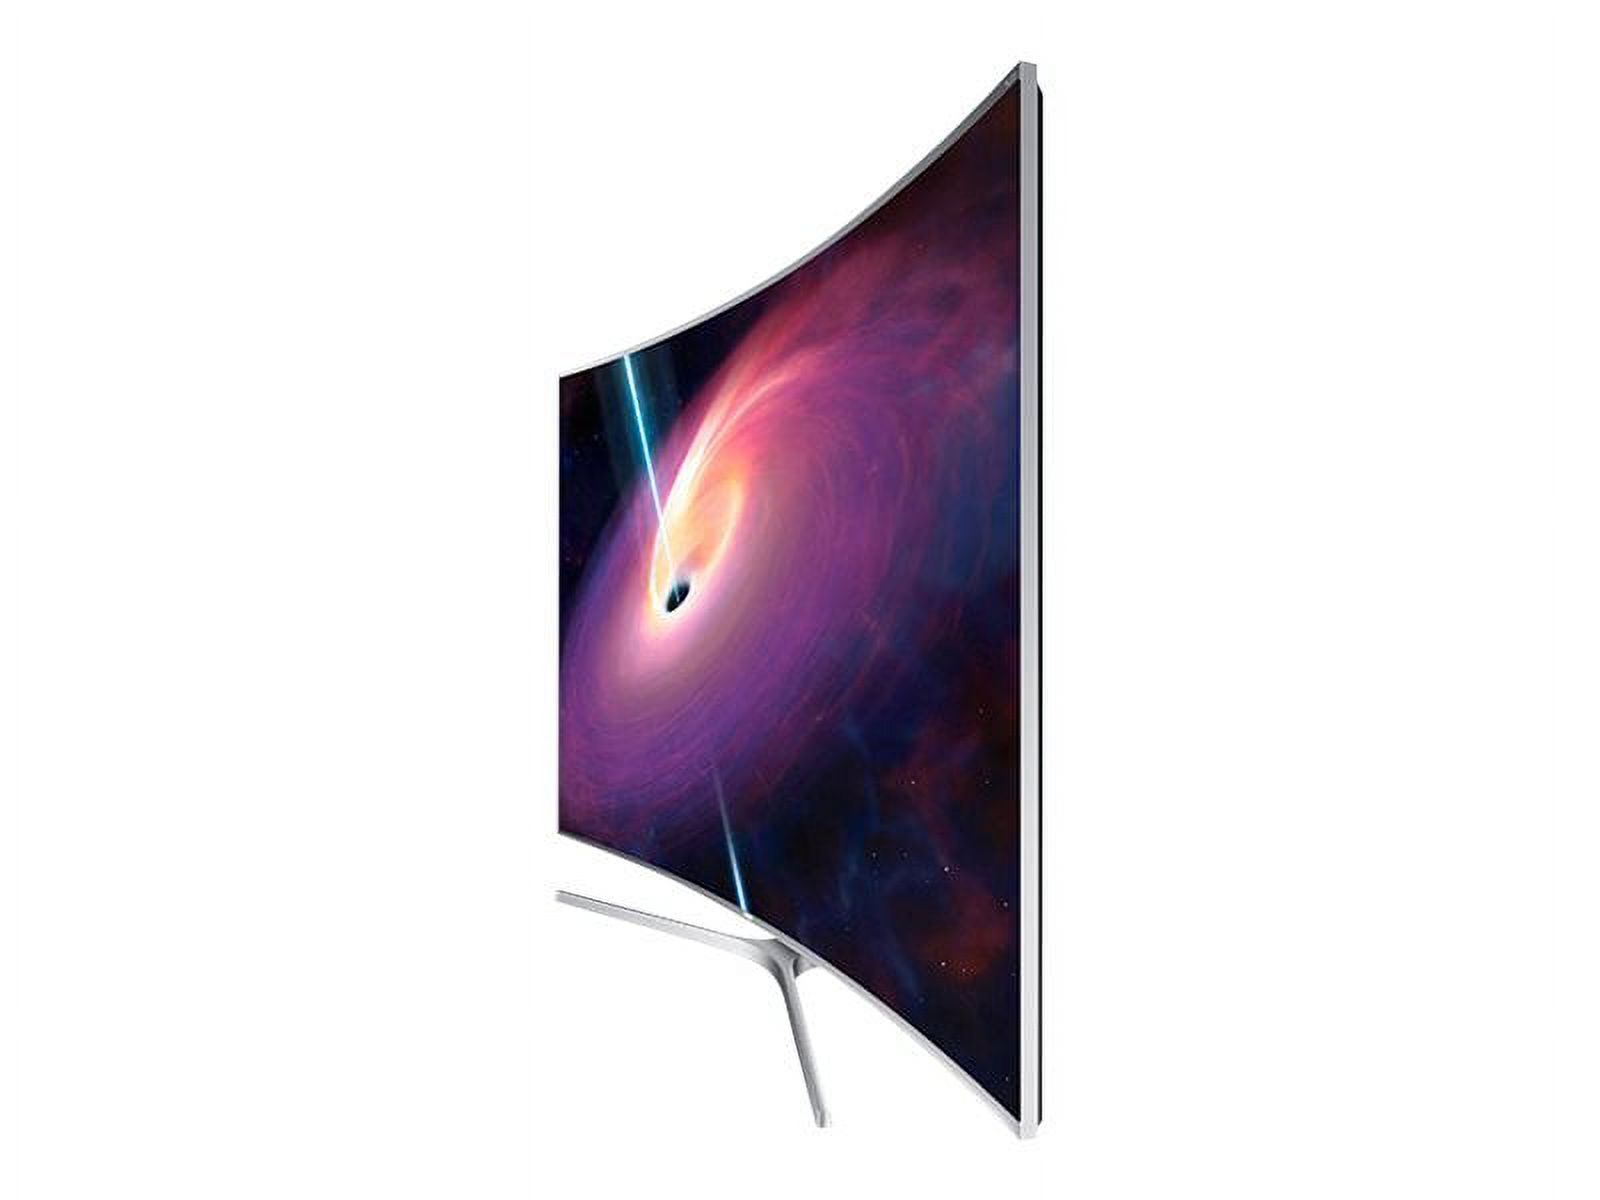 Samsung UN88JS9500F - 88" Diagonal Class JS9500 Series - curved 3D LED-backlit LCD TV - with camera - Smart TV - 4K SUHD (2160p) 3840 x 2160 - image 1 of 6